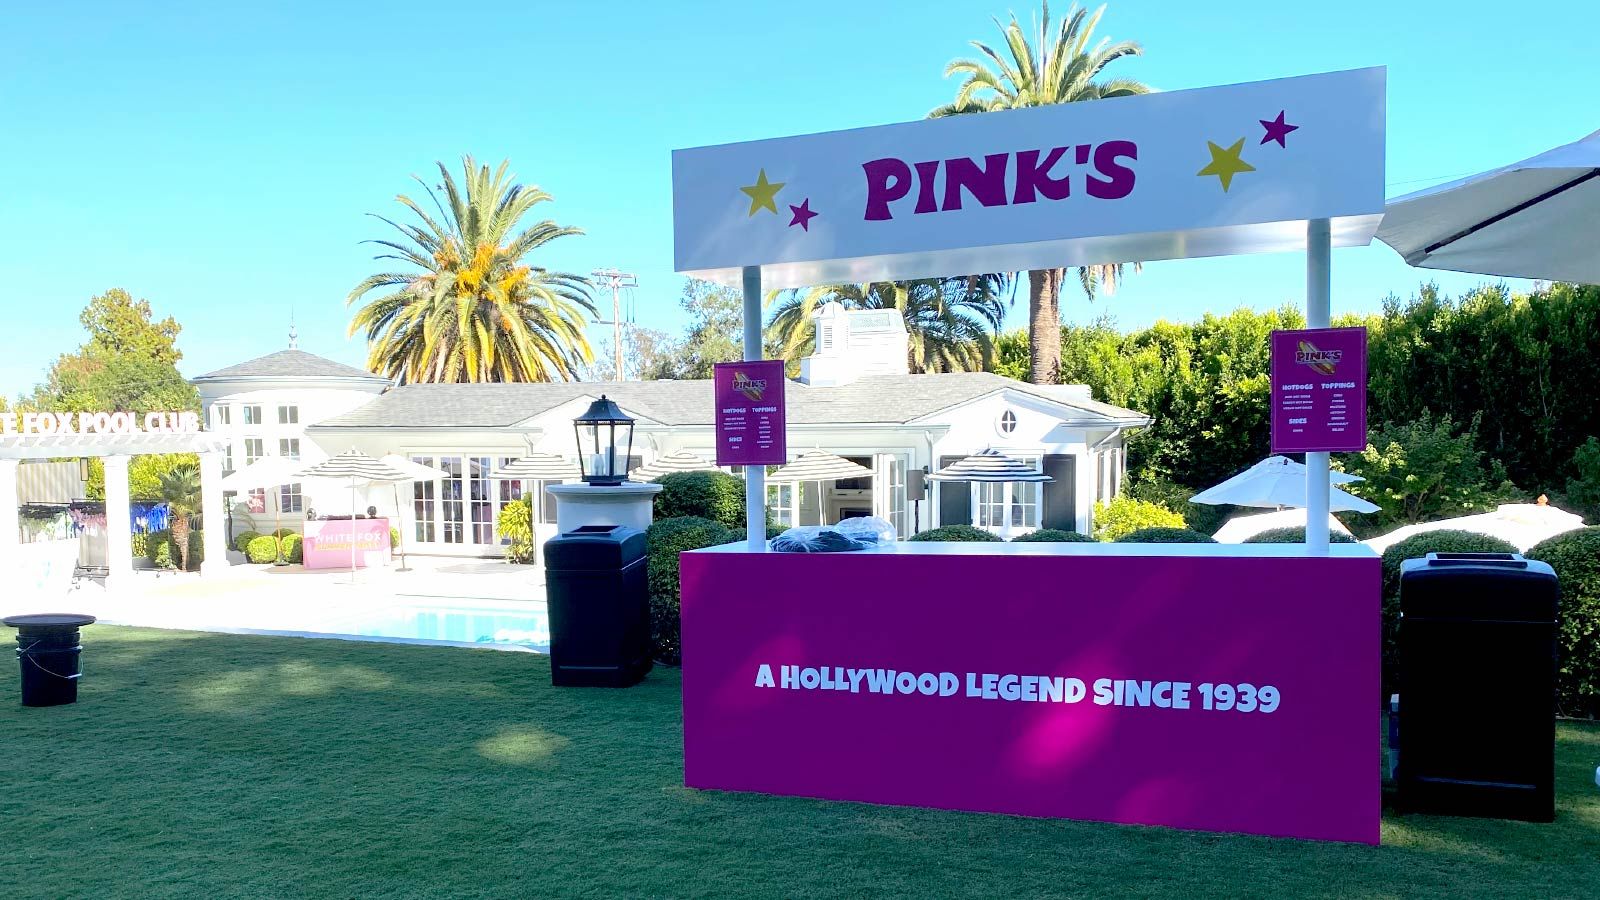 Pink's custom display placed outdoors